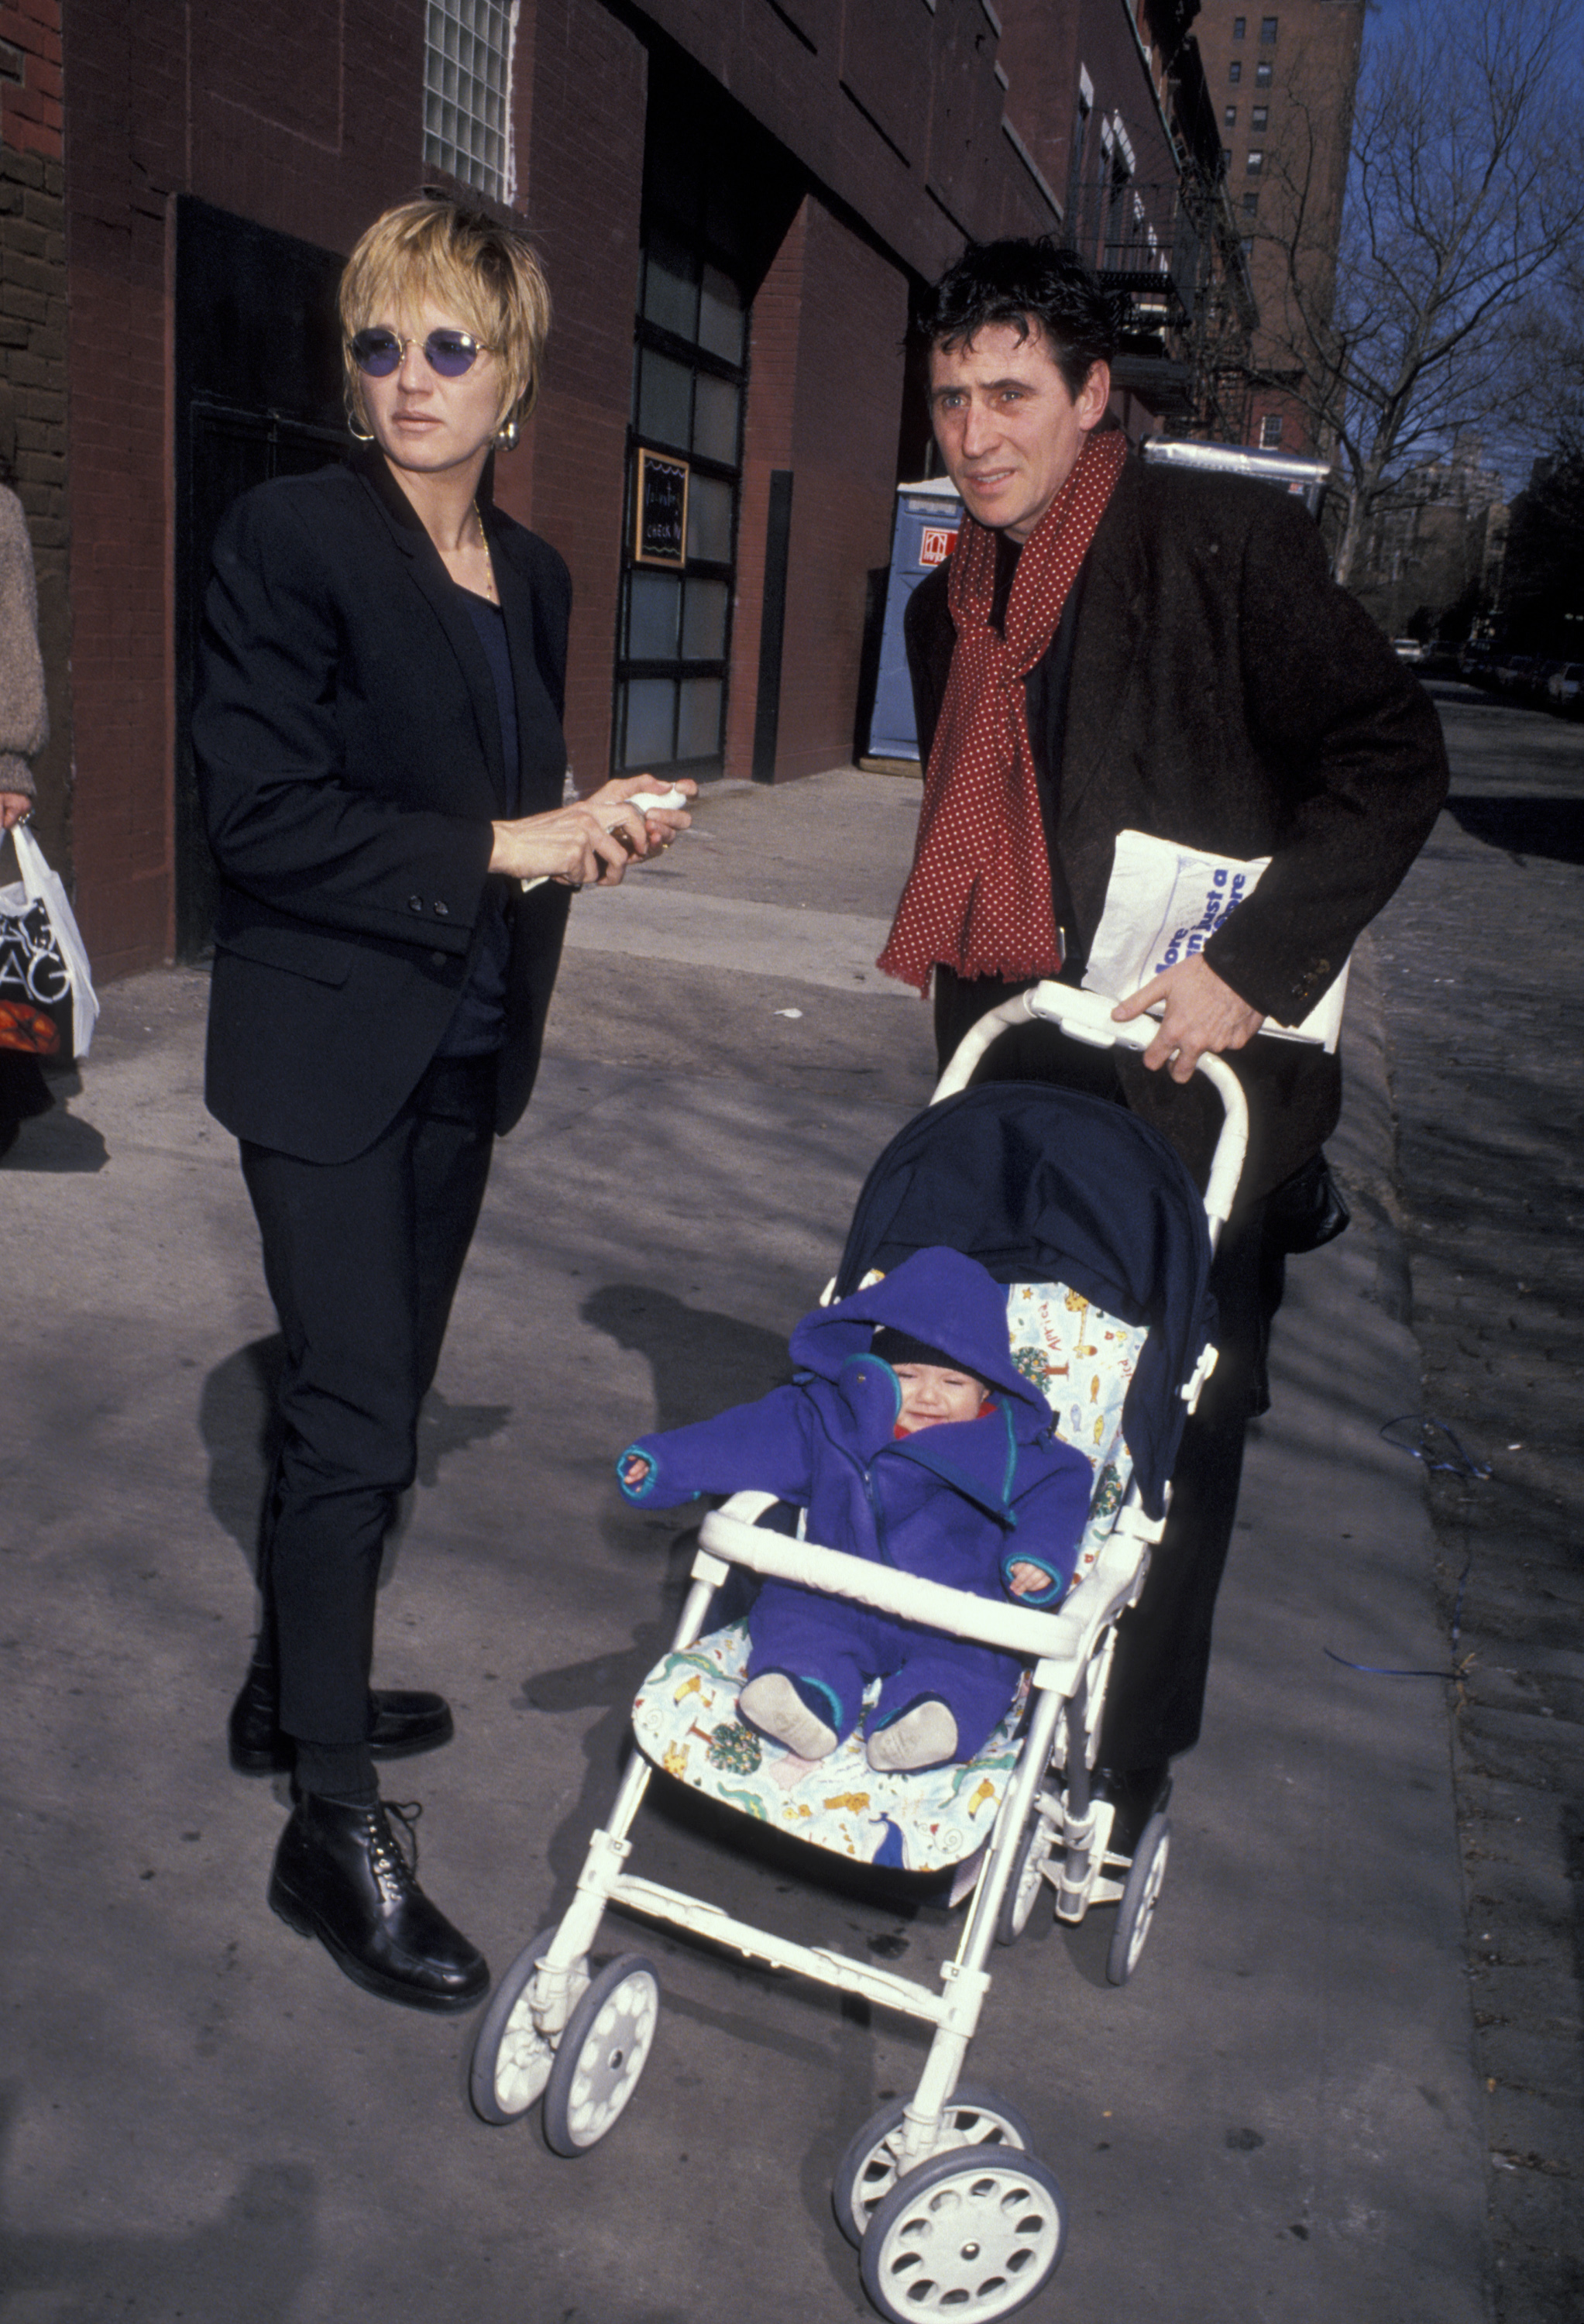 Ellen Barkin and her husband actor Gabriel Byrne pictured with their baby at the 1993 "Kids for Kids" Benefit on April 18, 1993 in New York | Source: Getty Images